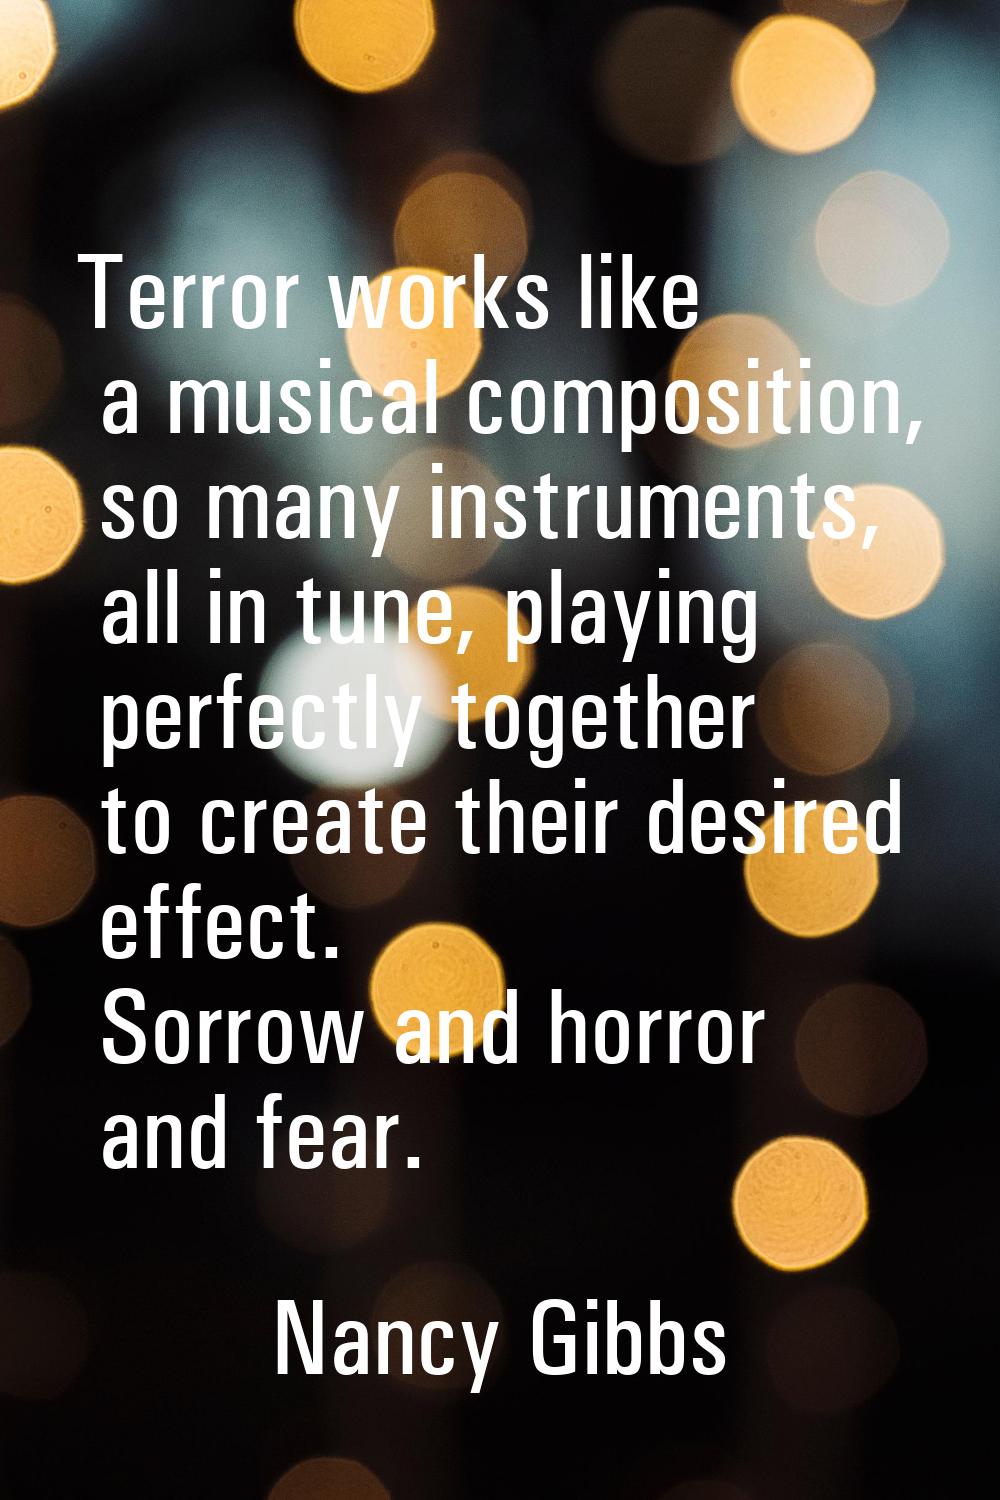 Terror works like a musical composition, so many instruments, all in tune, playing perfectly togeth